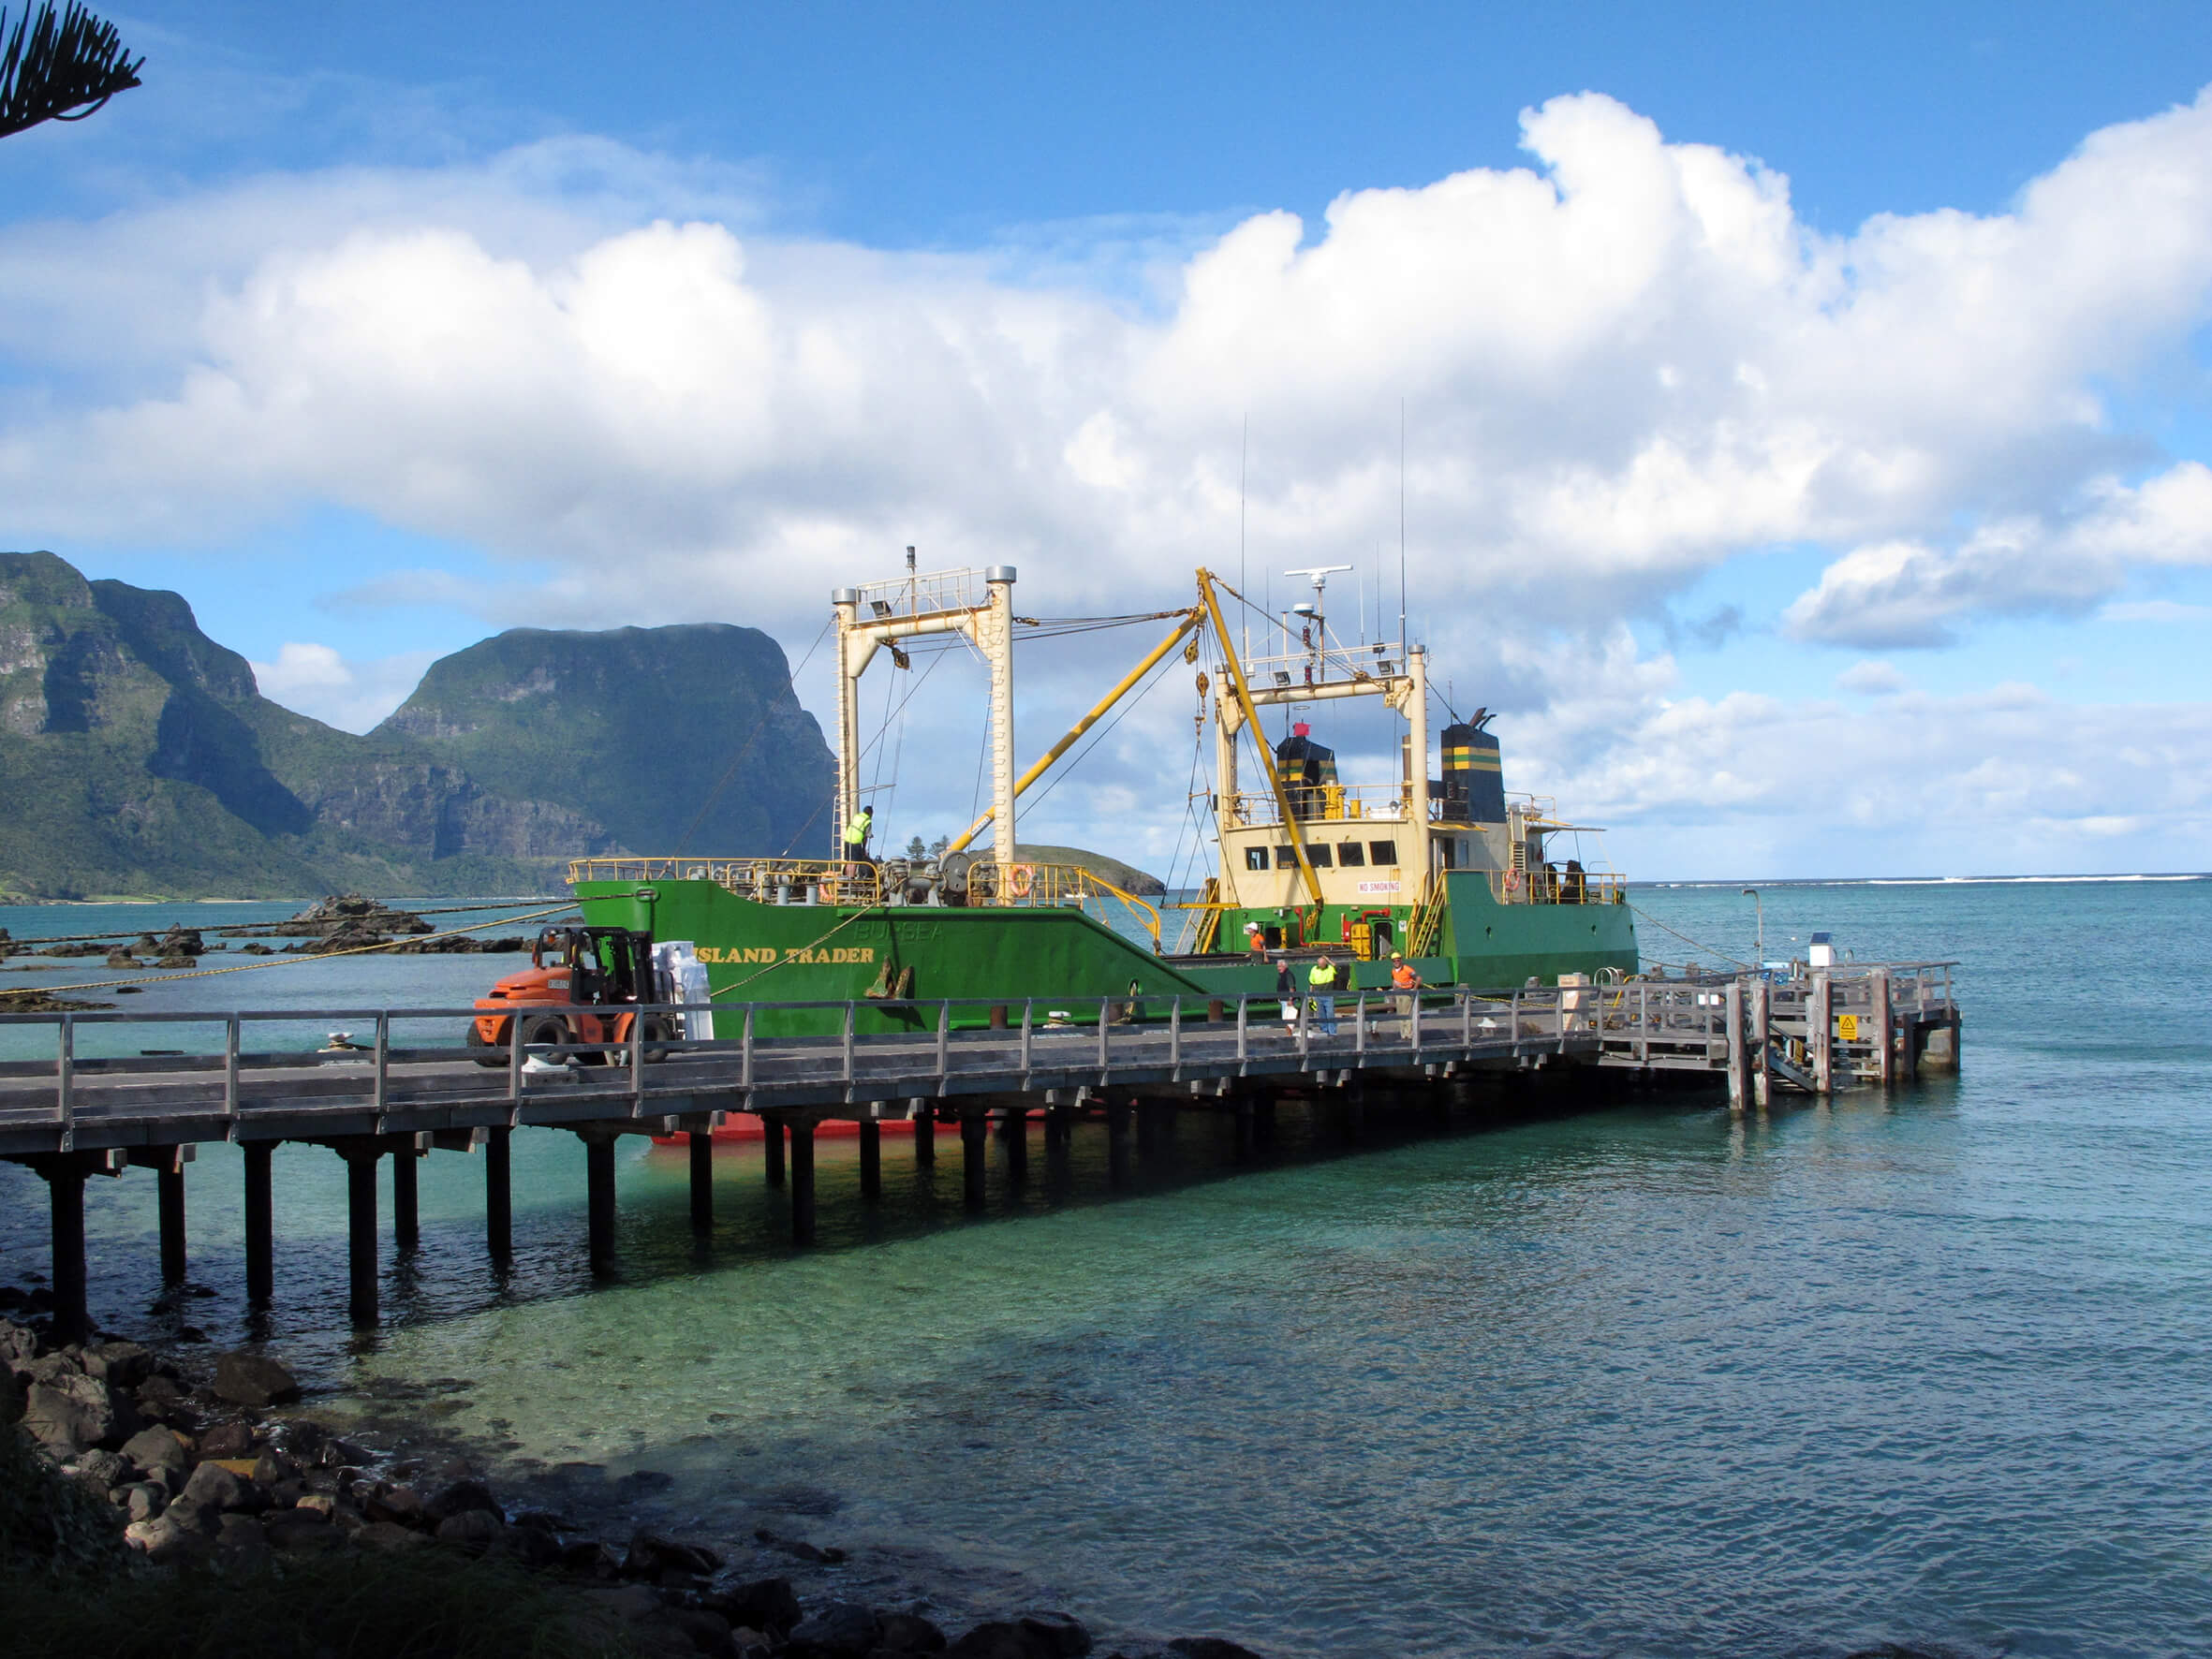 Ship at Lord howe Island jetty